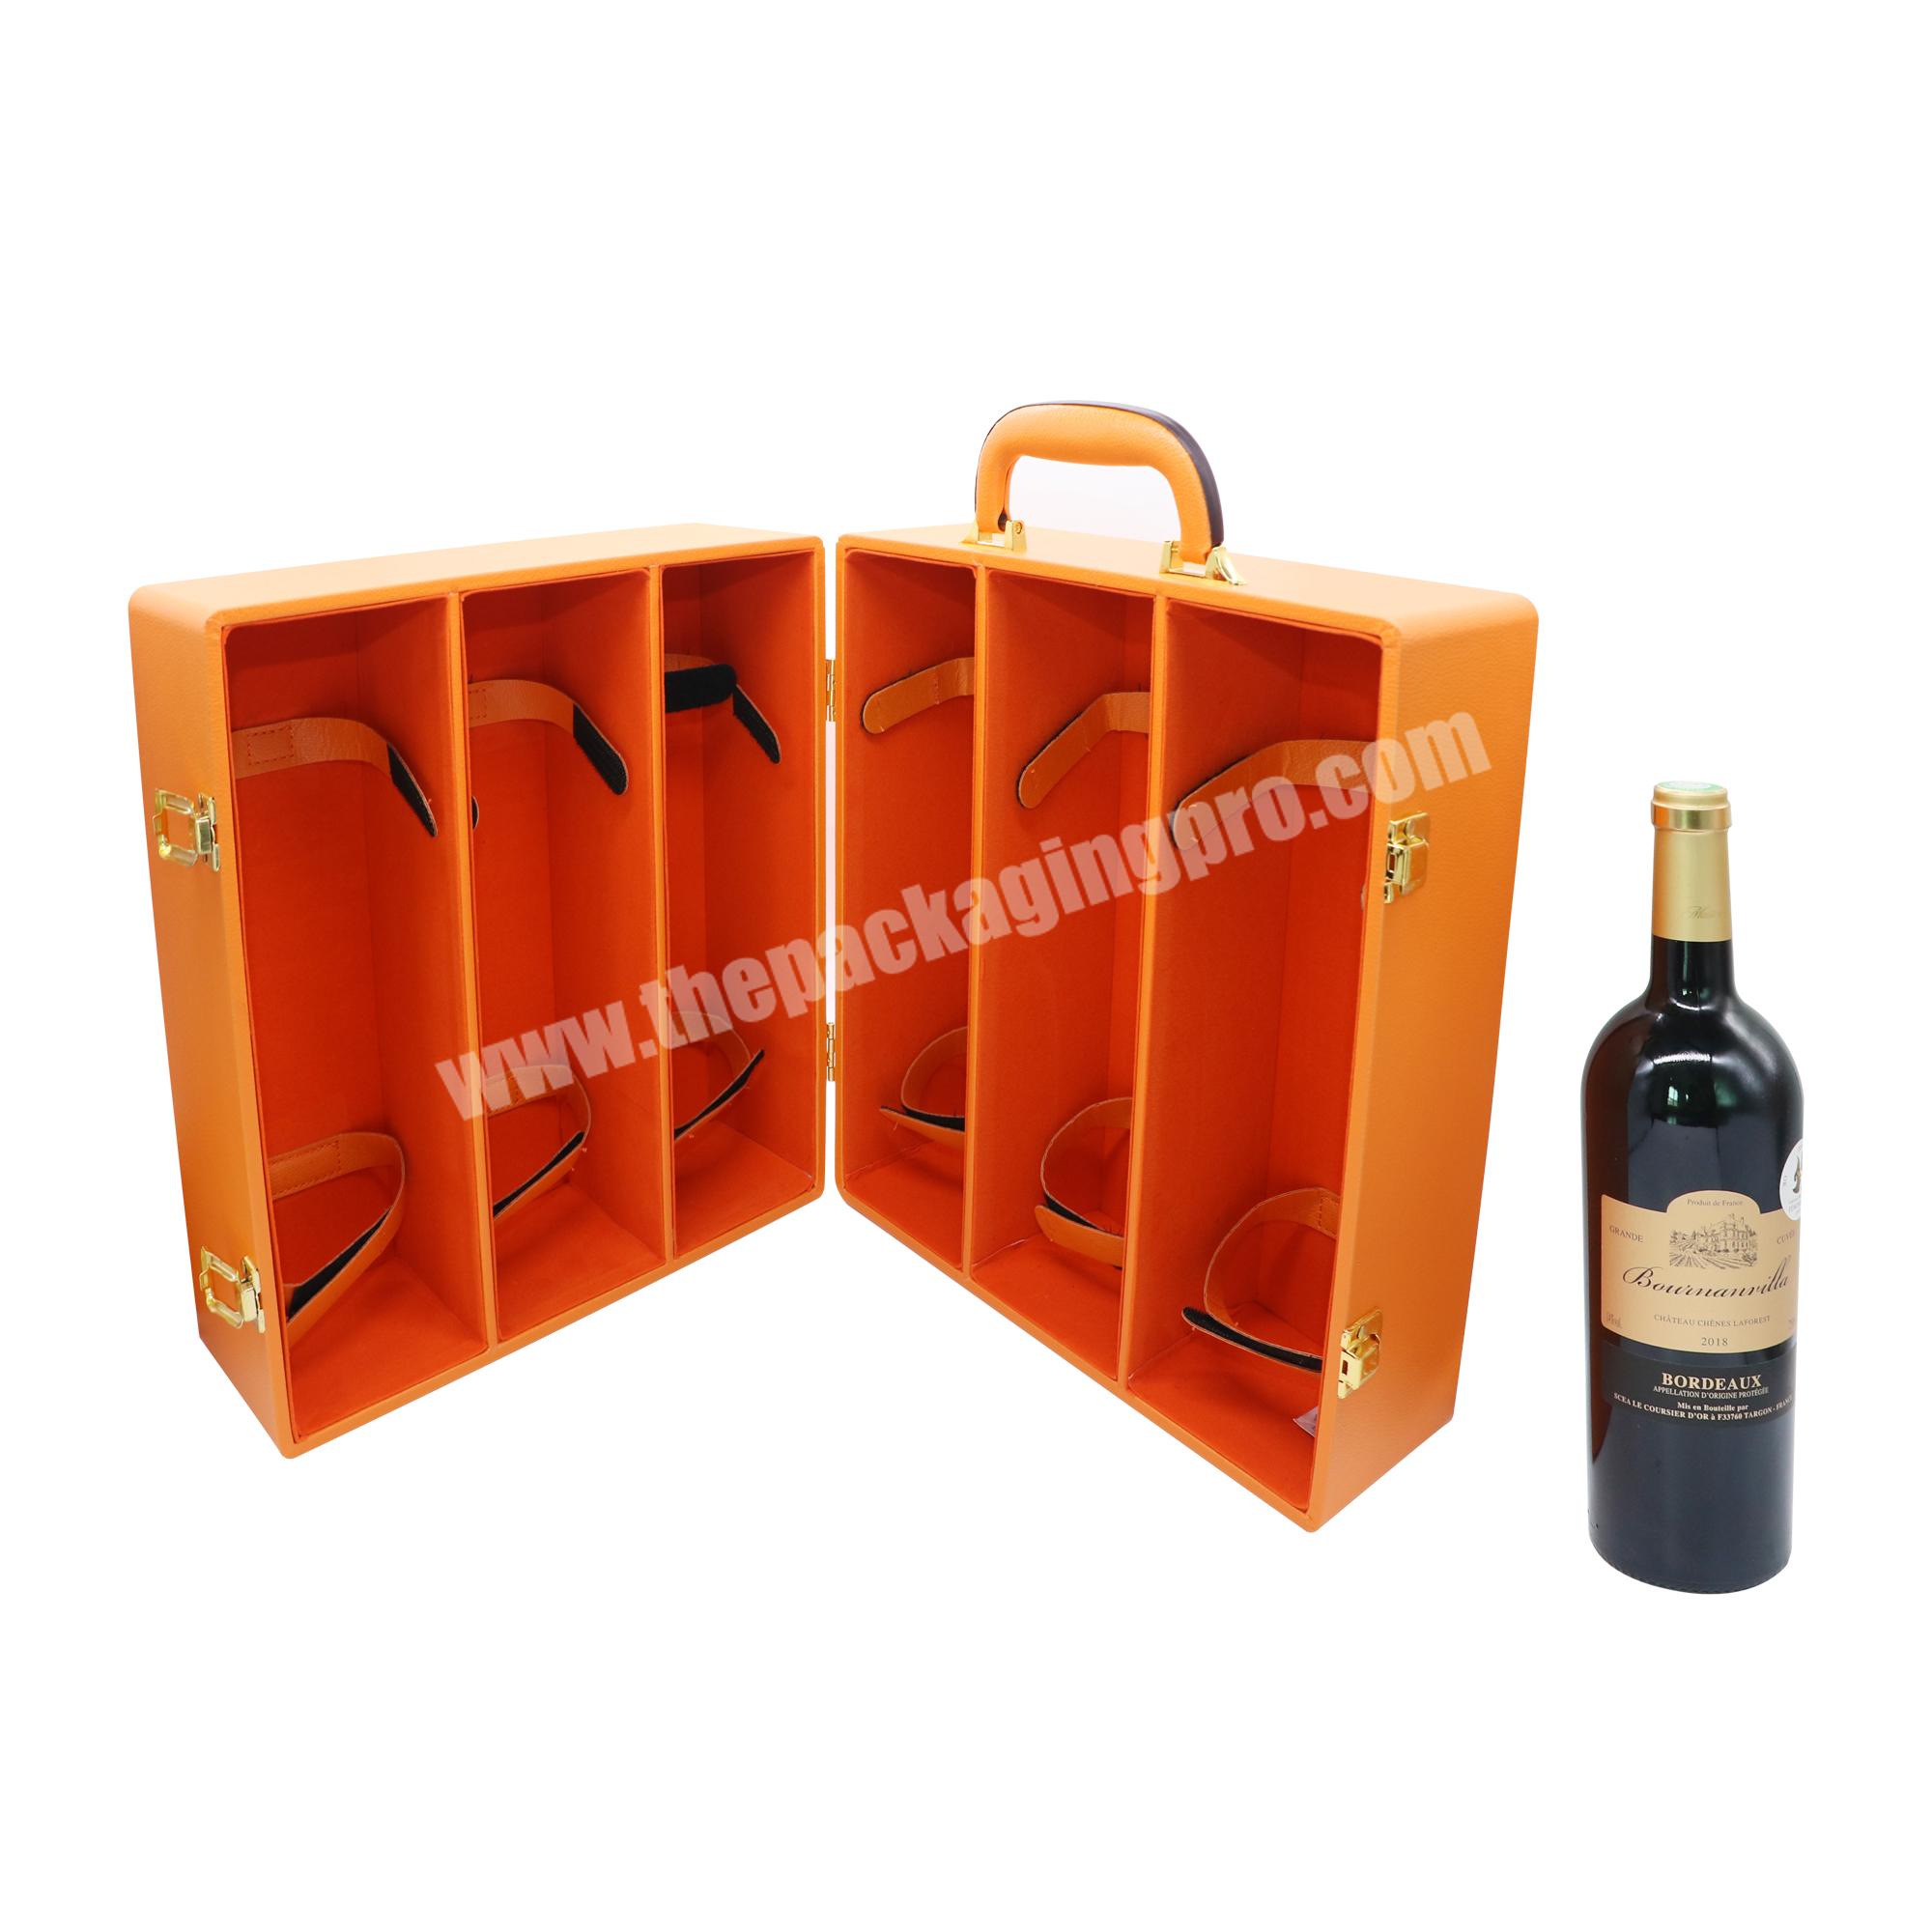 Luxury private label wine gift box set high quality wine gift boxes wine boxes wholesale